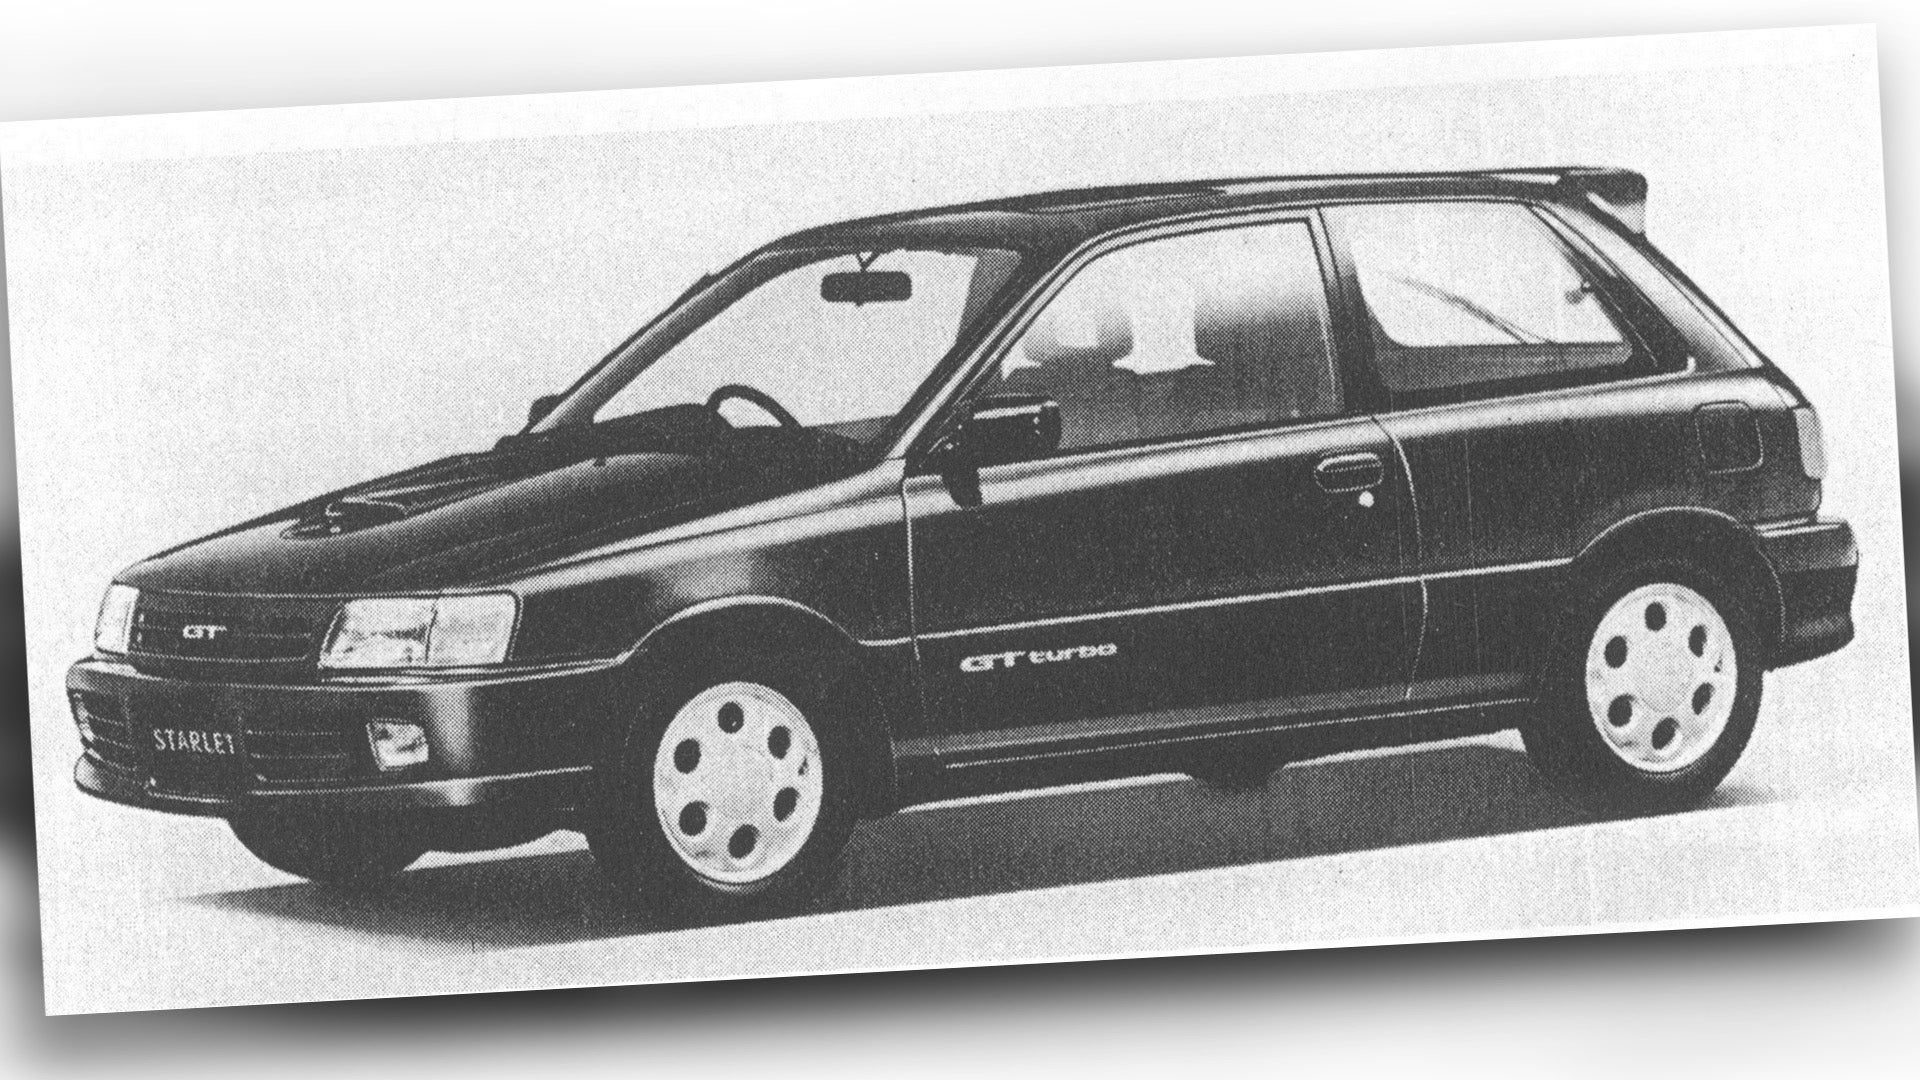 Toyota is bringing back the Starlet Hatch and introducing a rally-ready GR model, according to reports.